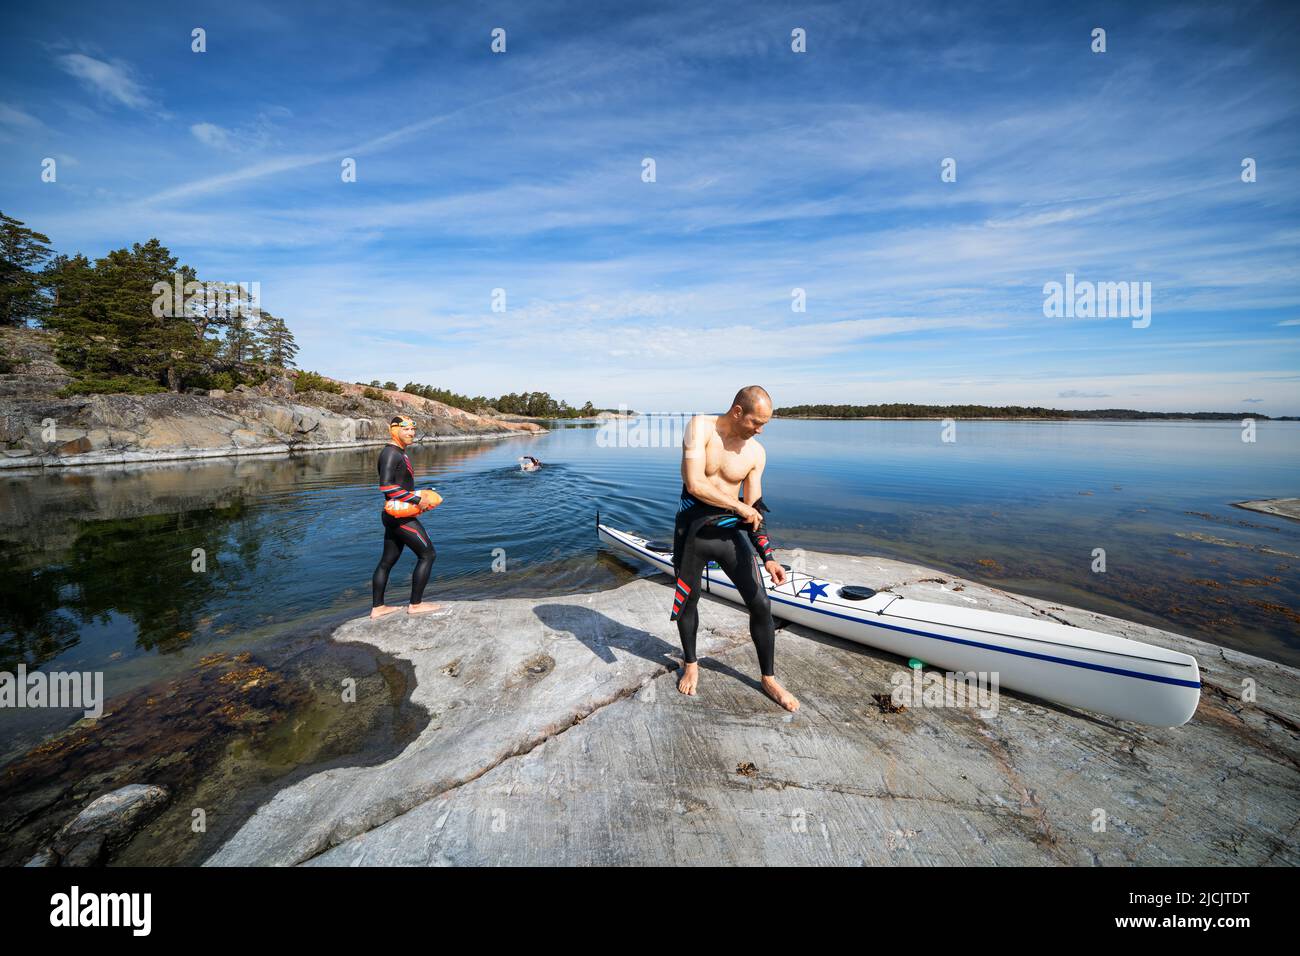 Getting ready for open water swimming at Dalskär island, Parainen, Finland Stock Photo